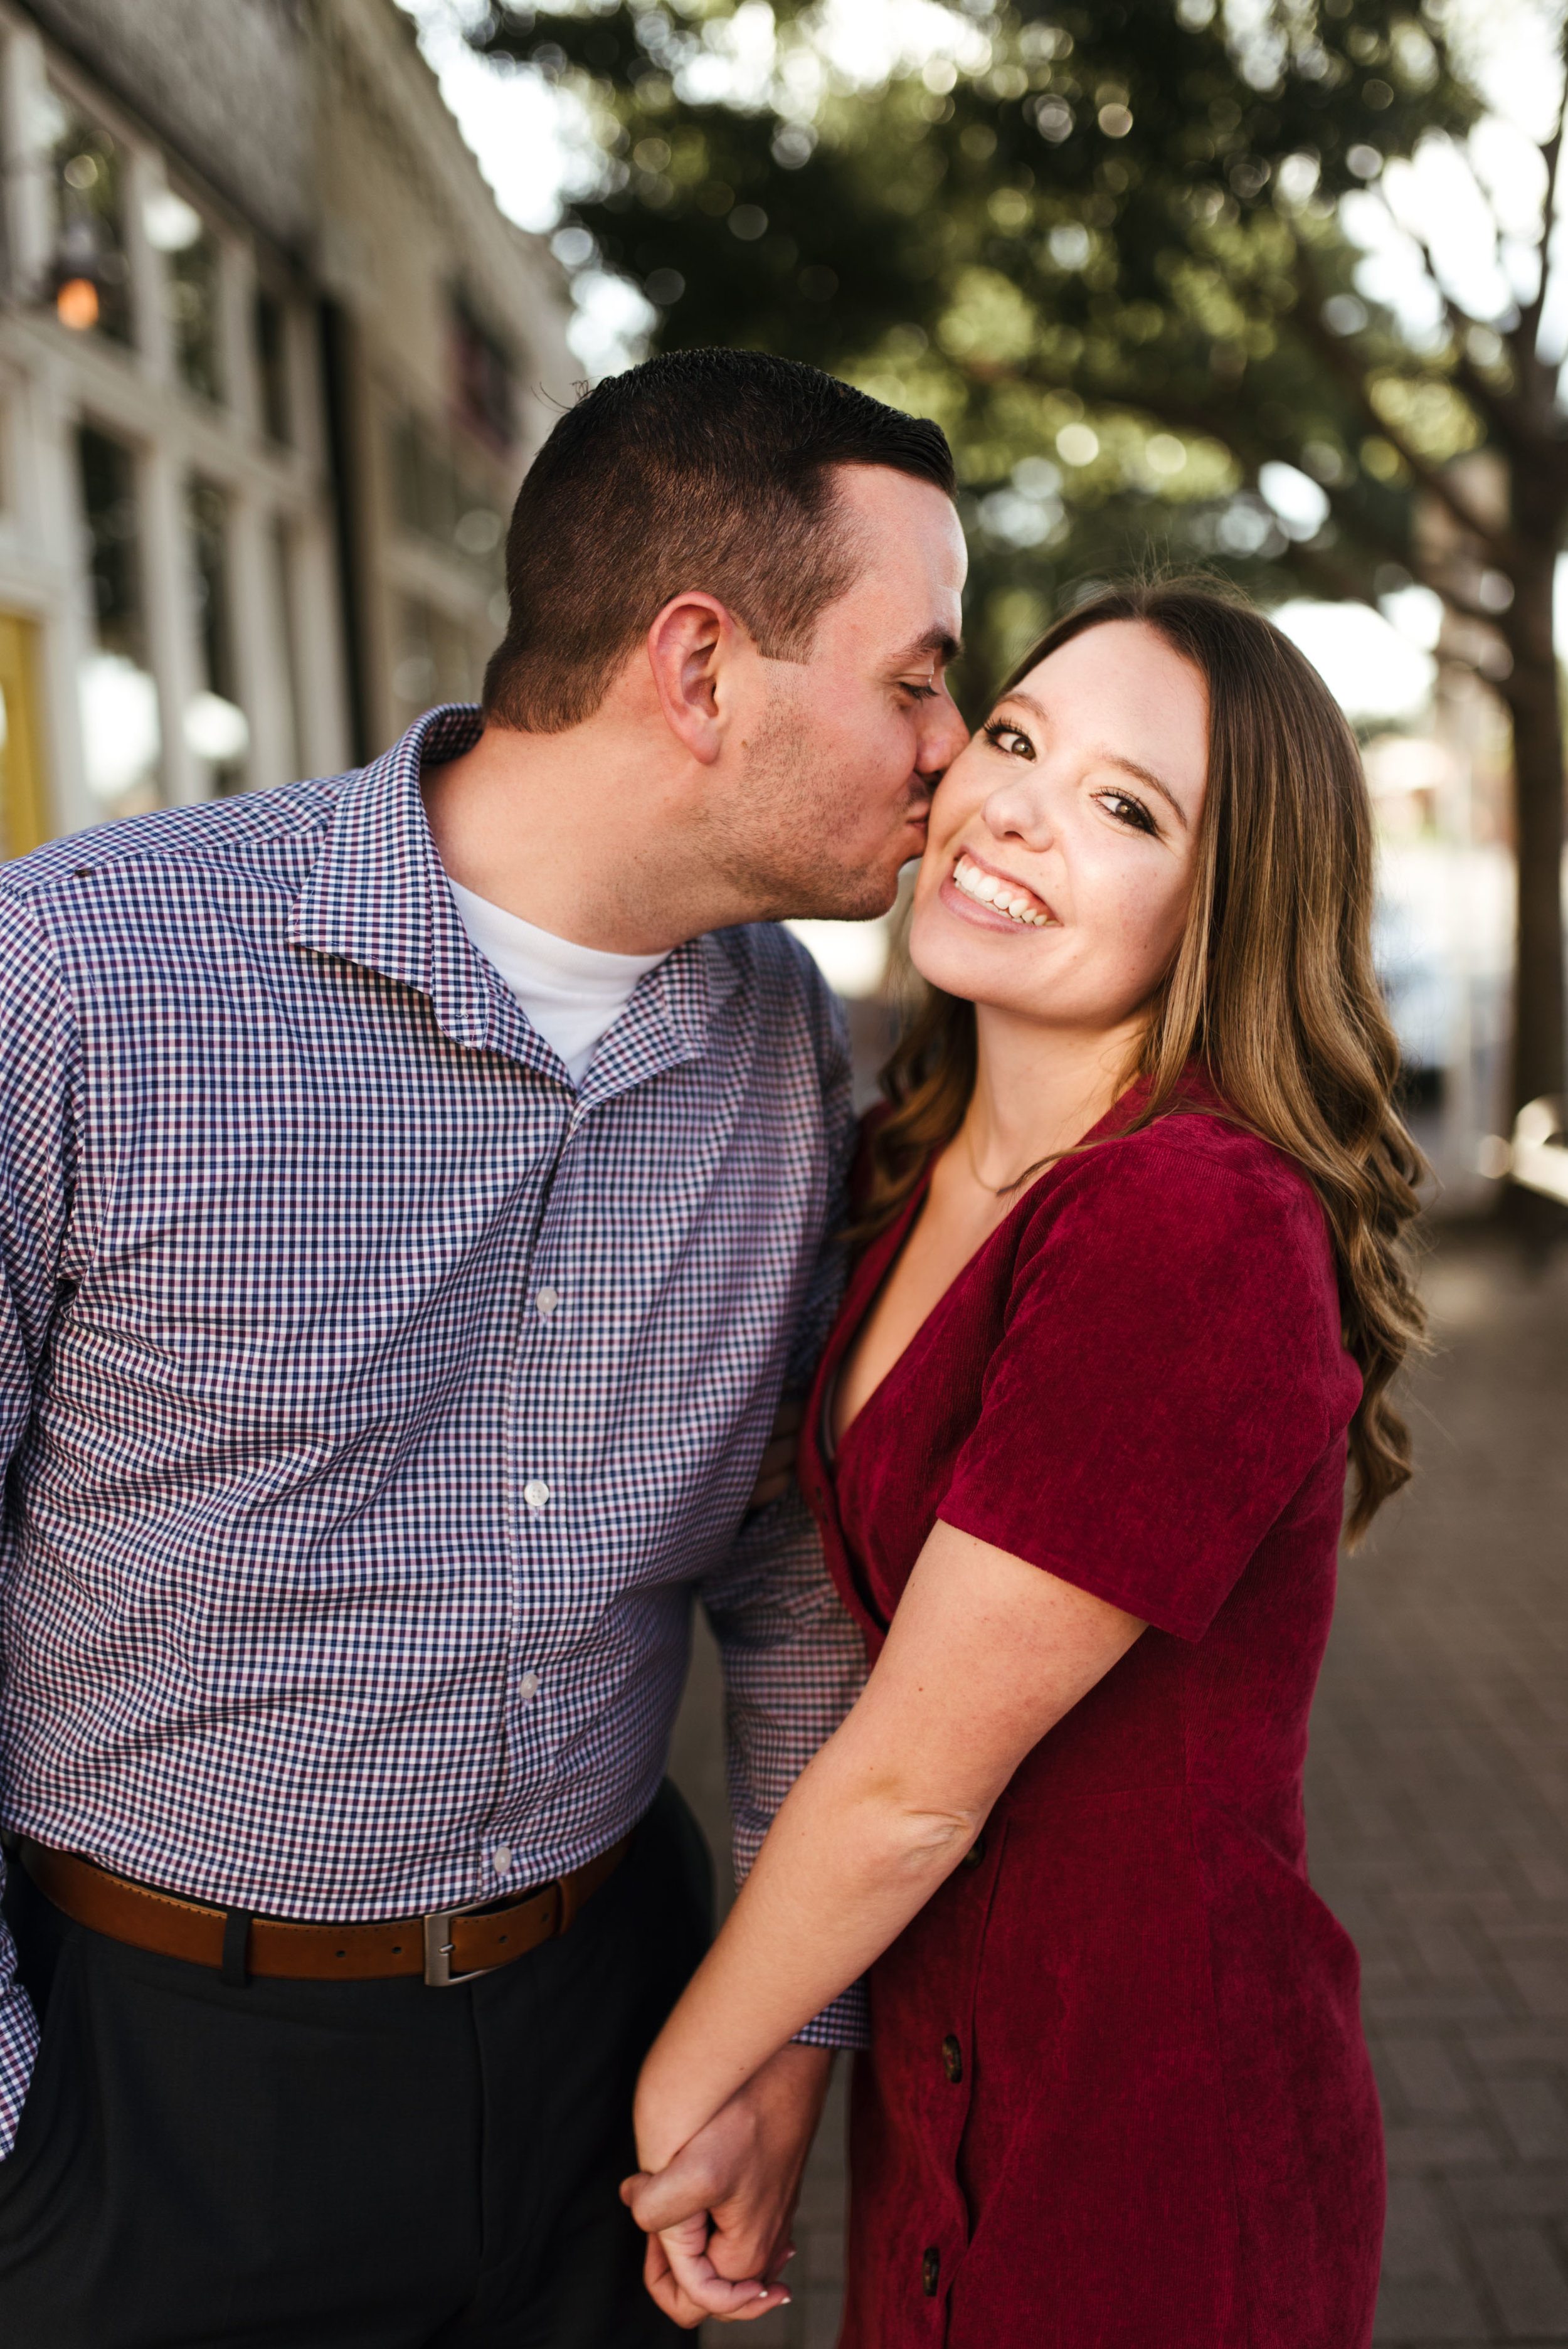  Fort Worth engagement session | Fort Worth engagement photographer | Fort Worth Wedding photographer | www.jordanmitchellphotography.com 